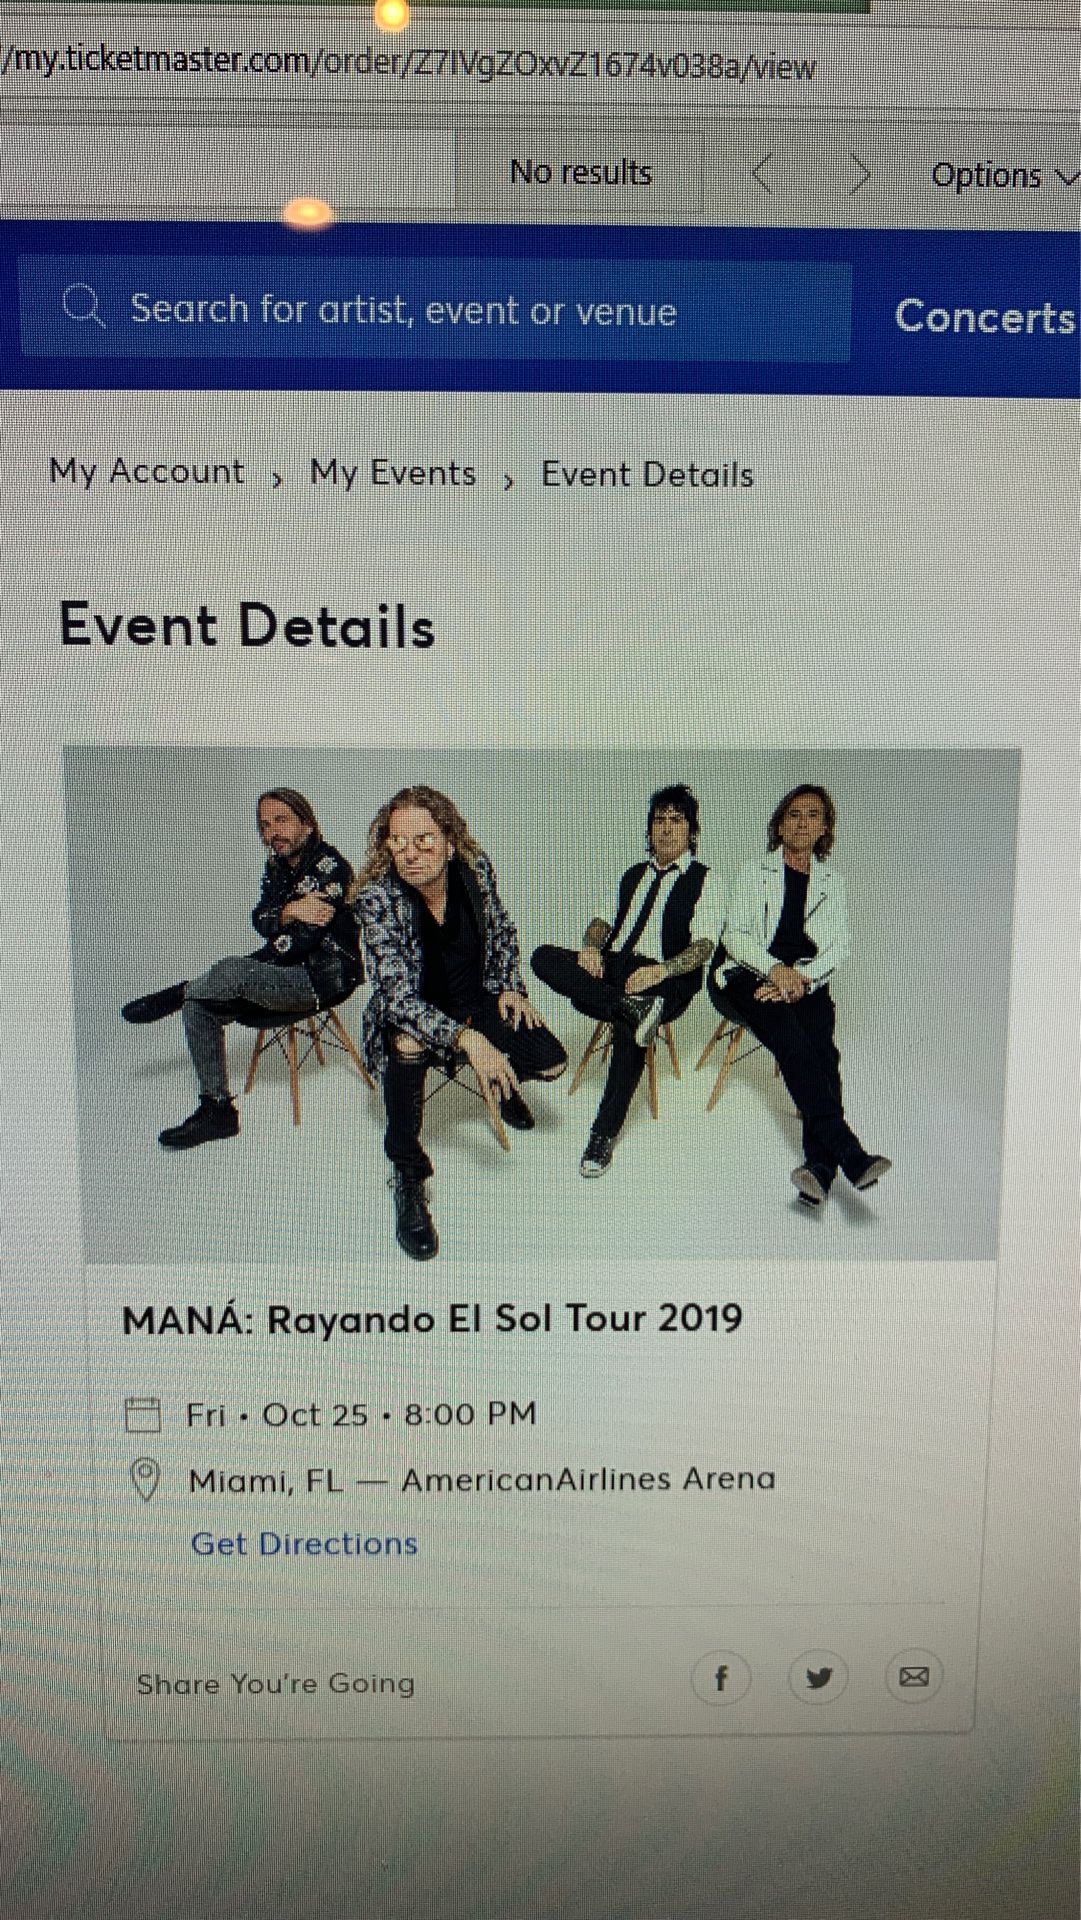 Mana concert tickets for oct 25